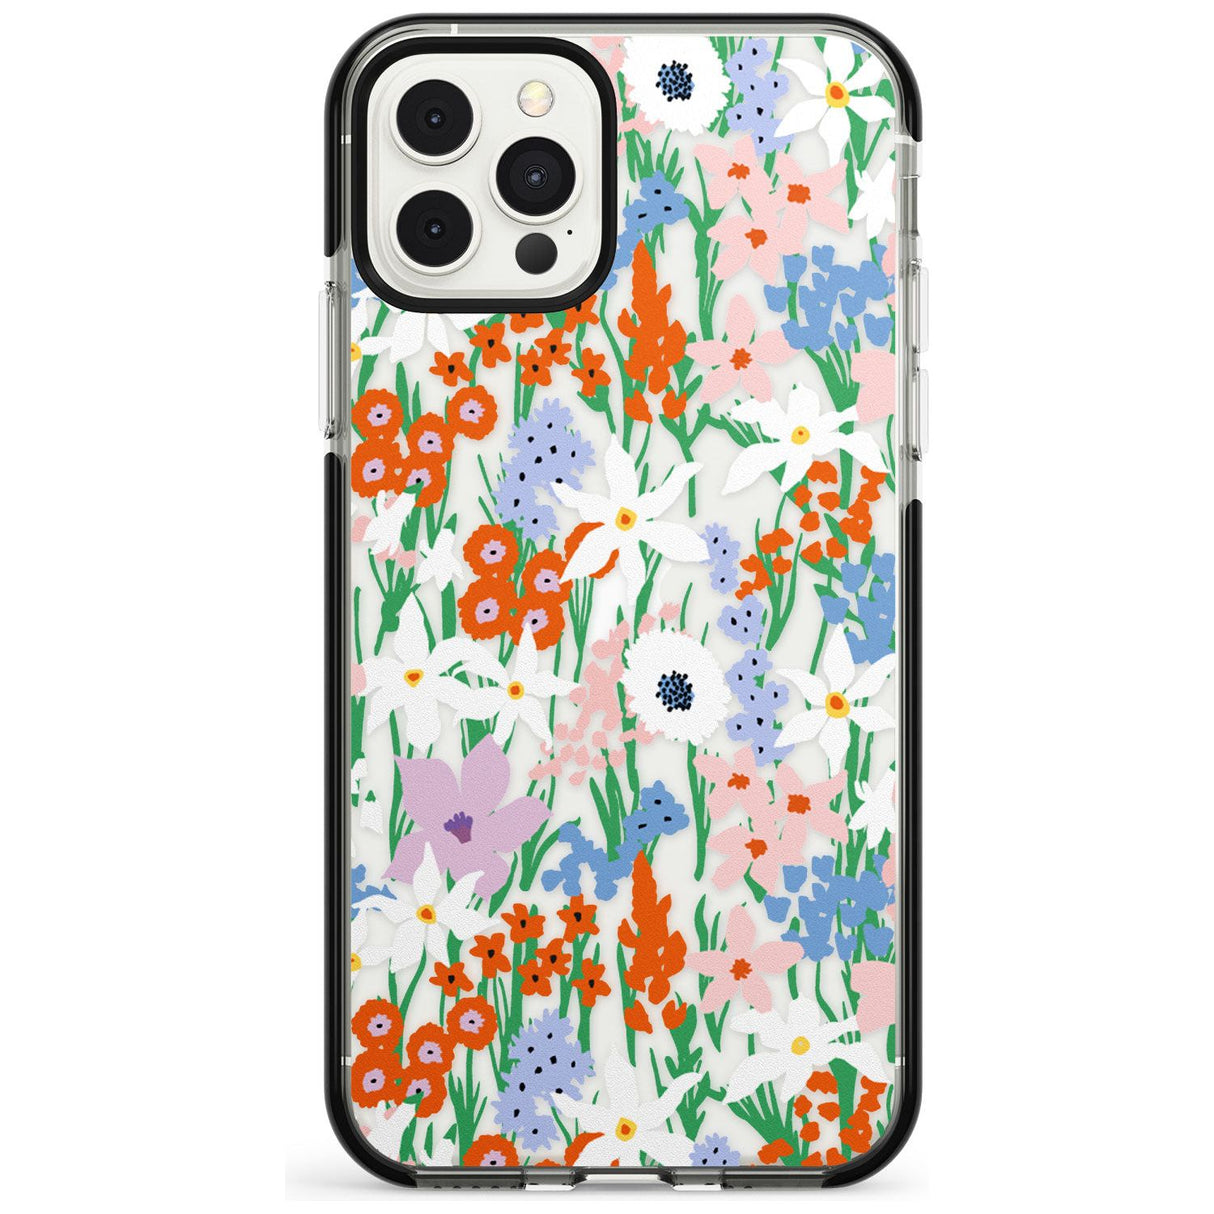 Springtime Meadow: Transparent Pink Fade Impact Phone Case for iPhone 11